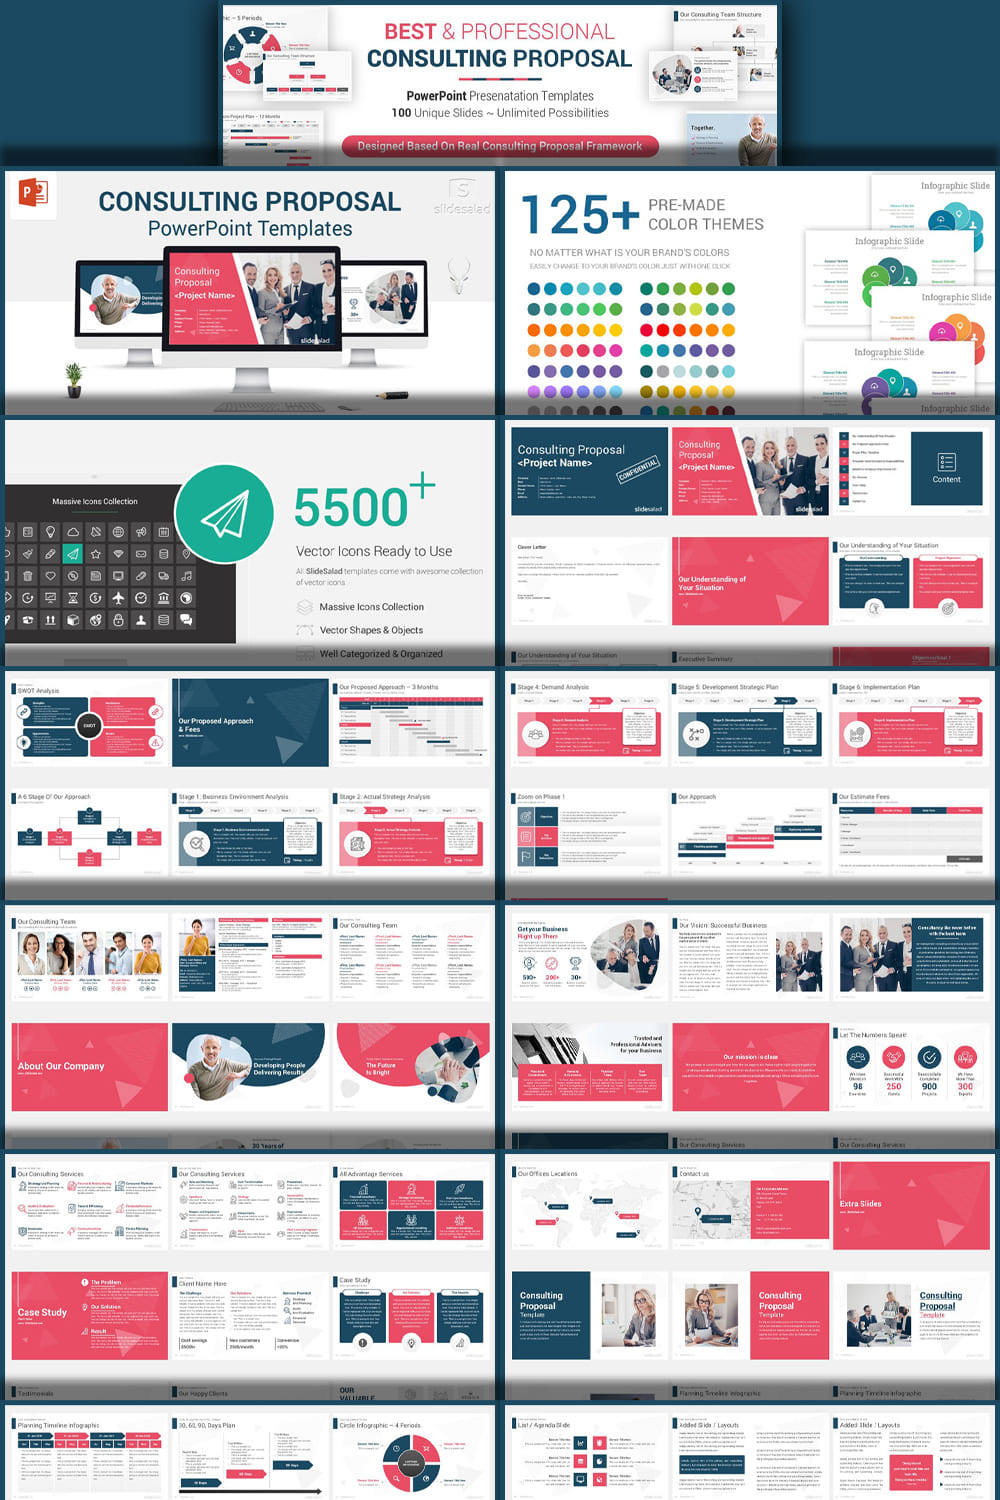 Consulting Proposal PowerPoint pinterest image.